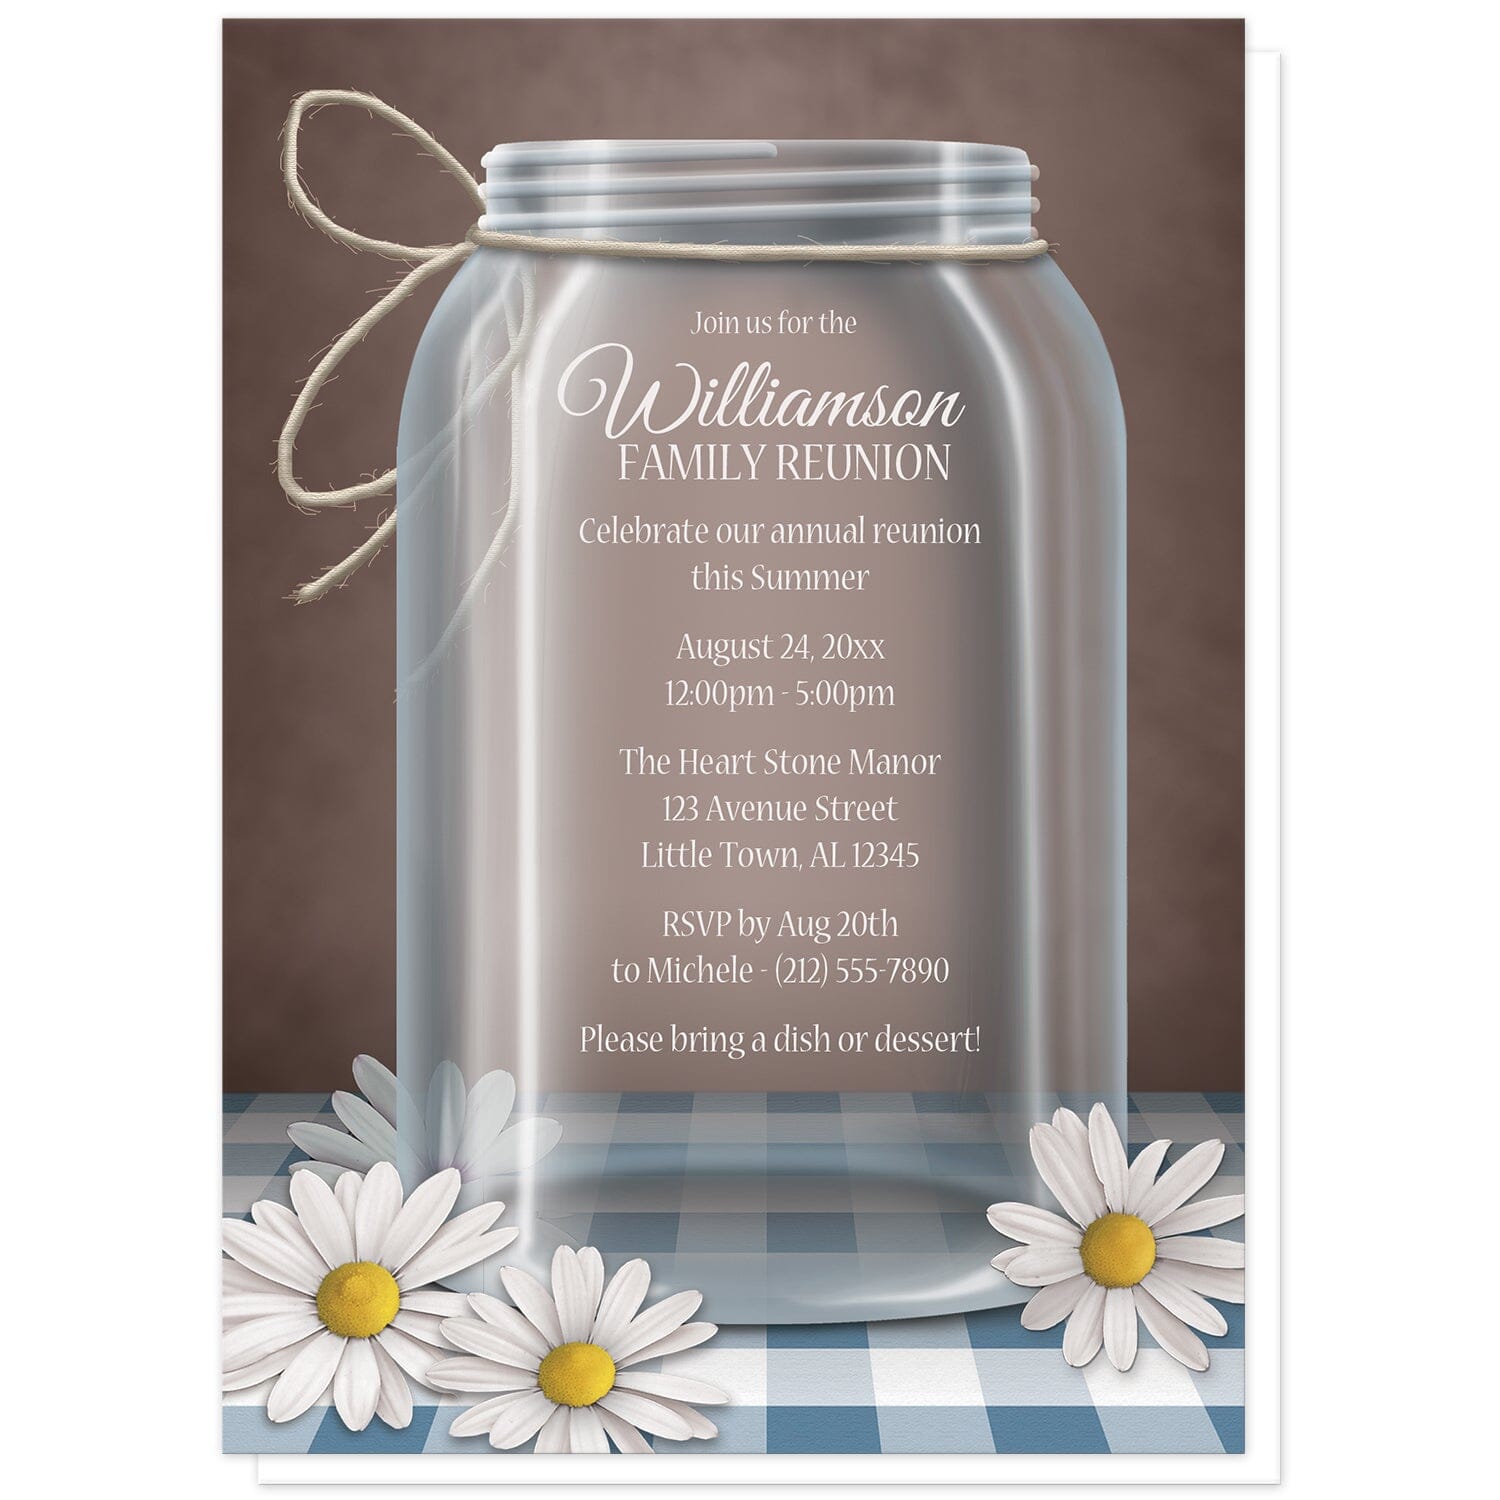 Country Mason Jar Daisy Gingham Family Reunion Invitations at Artistically Invited. Country mason jar daisy gingham family reunion invitations with an illustration of a glass mason jar with twine tied around the neck of it, and white and yellow daisies laying at the base of the jar on a blue gingham tabletop and over a vintage brown background. Your personalized reunion celebration details are custom printed in white within the mason jar illustration.